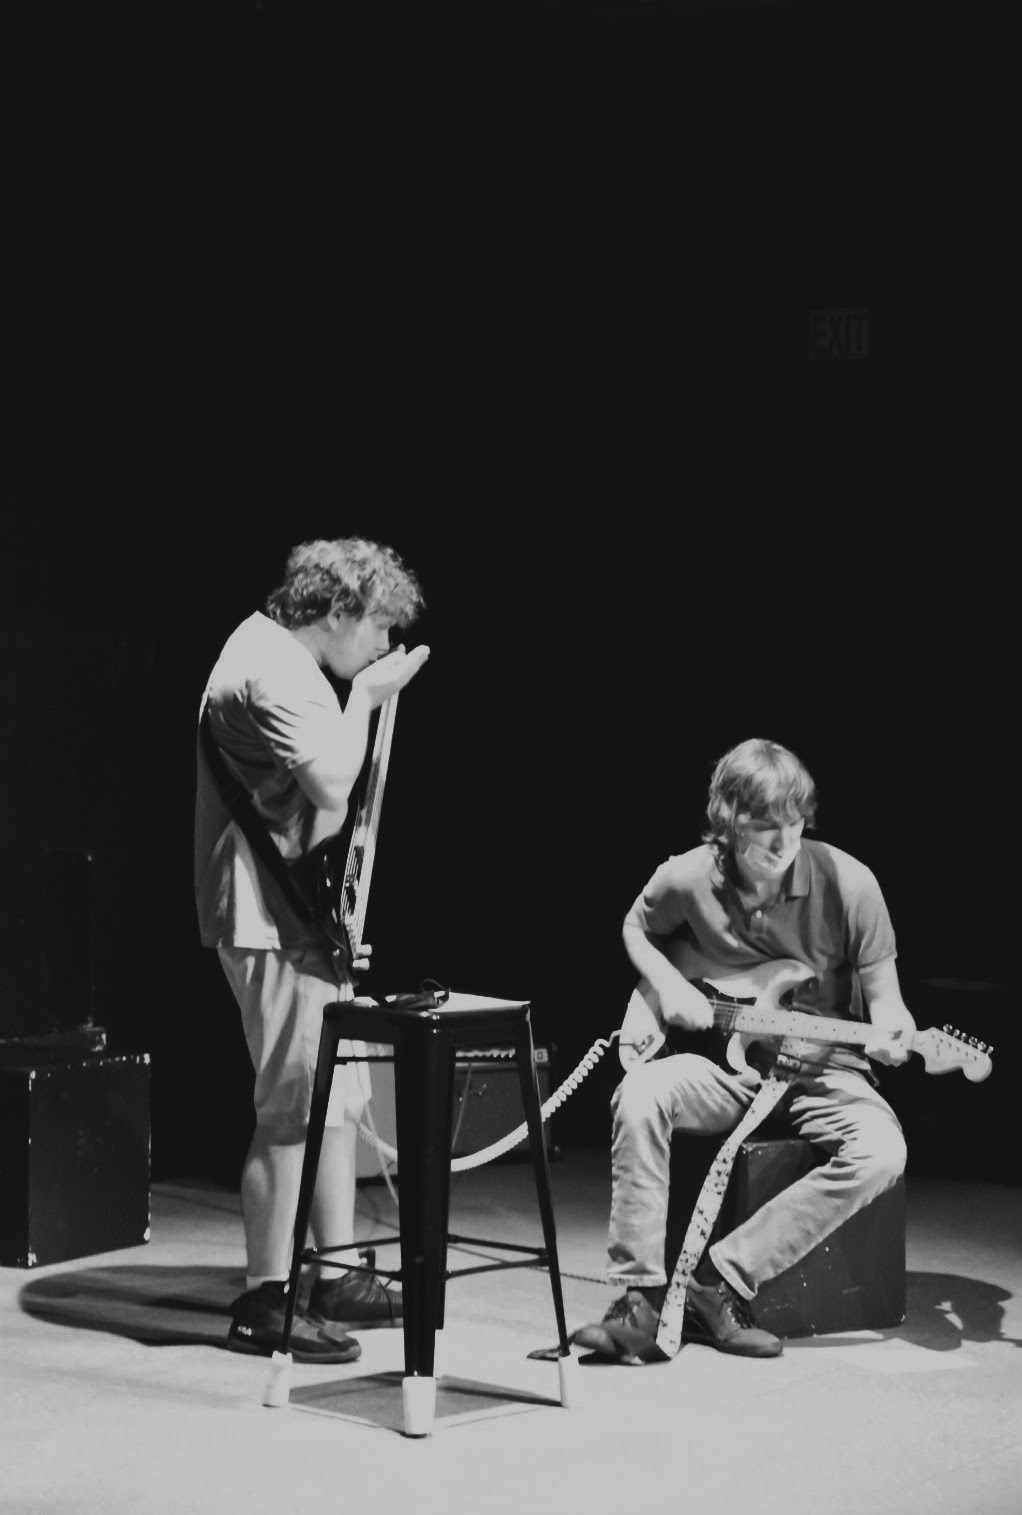 One student stands to the left playing a harmonica and holding a guitar; another student sits to the right playing a guitar.